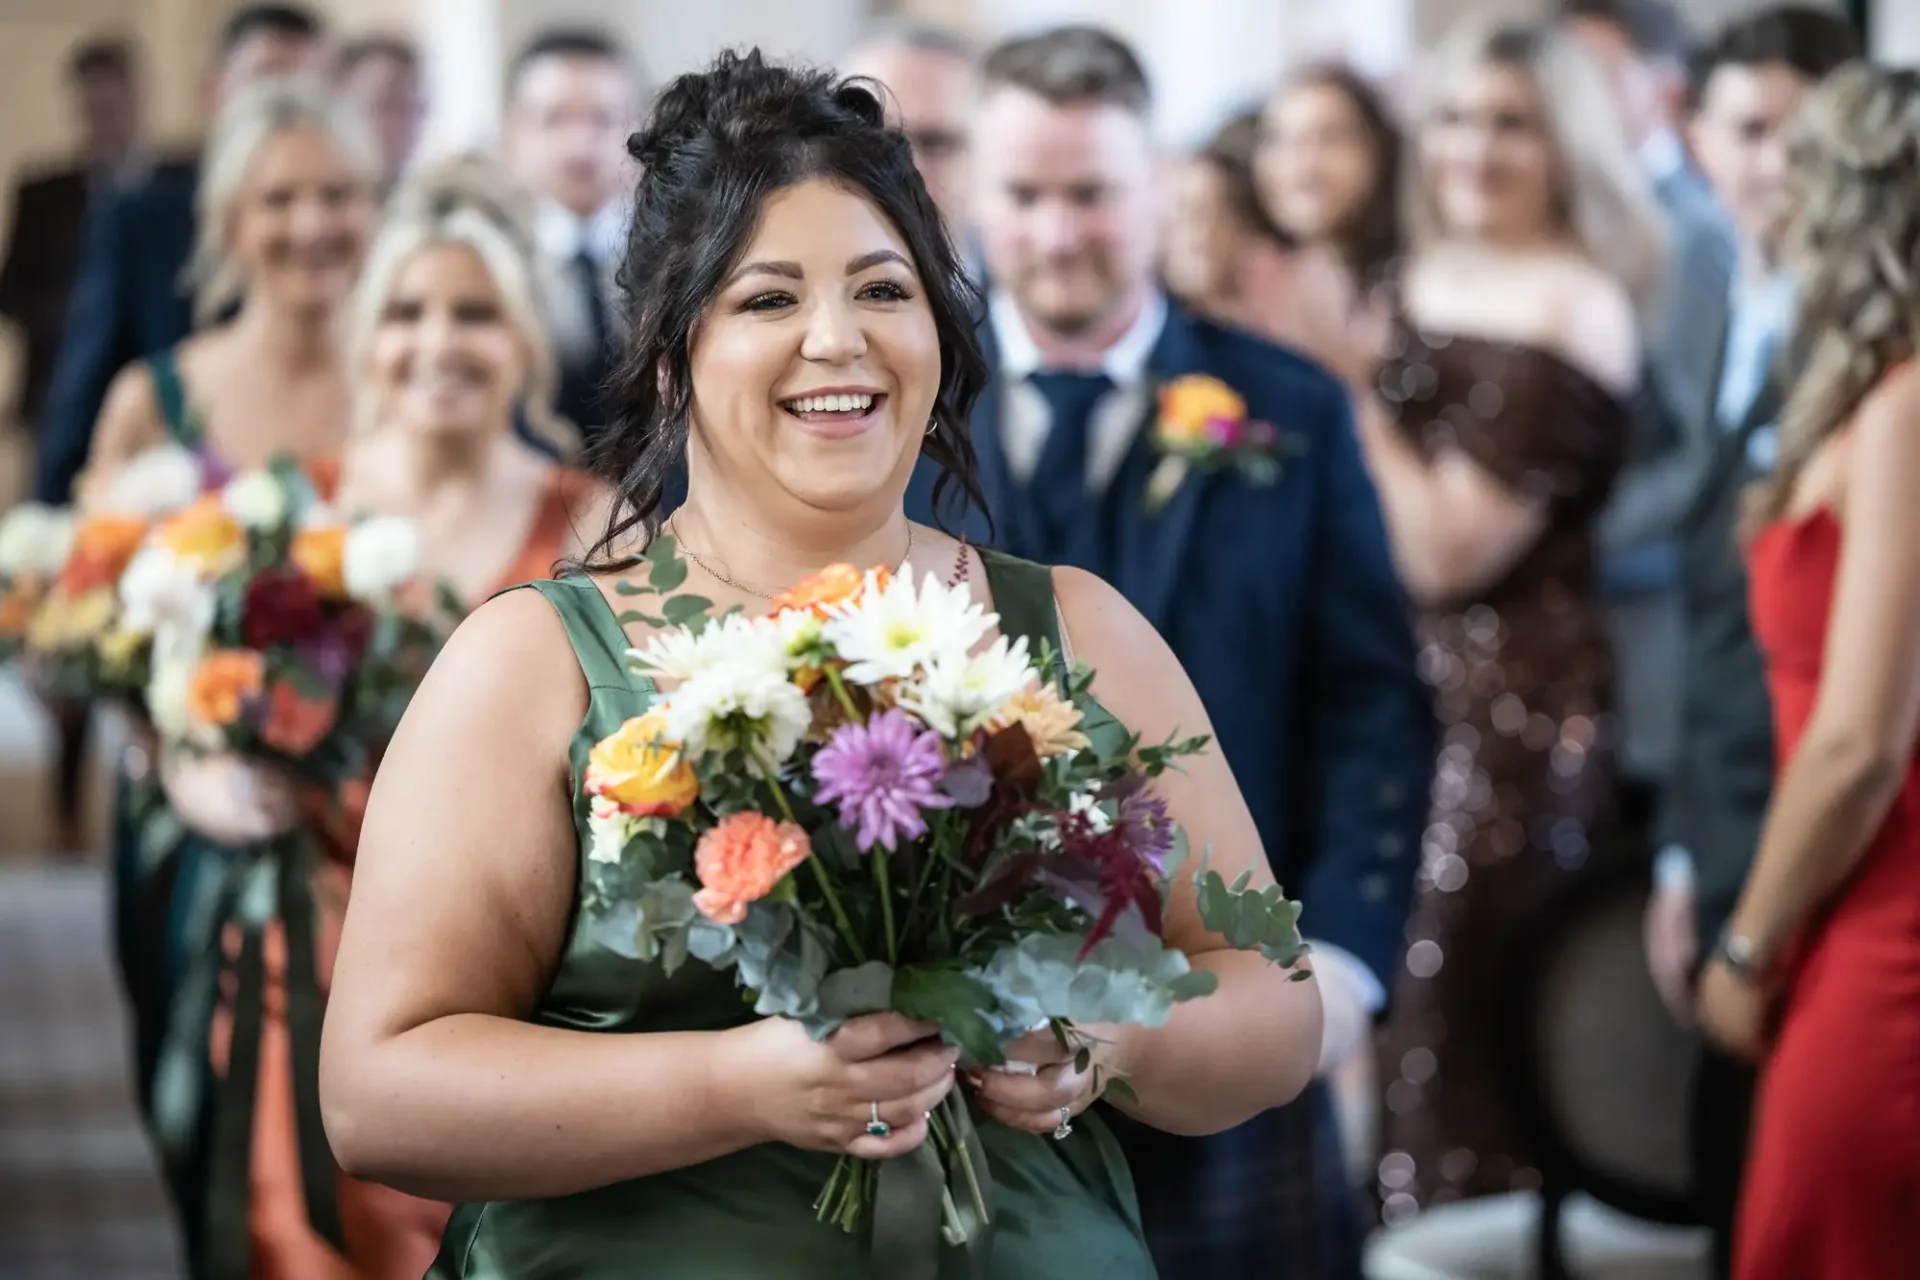 Bridesmaid in a green dress smiling as she walks down the aisle holding a bouquet, with wedding guests in the background.